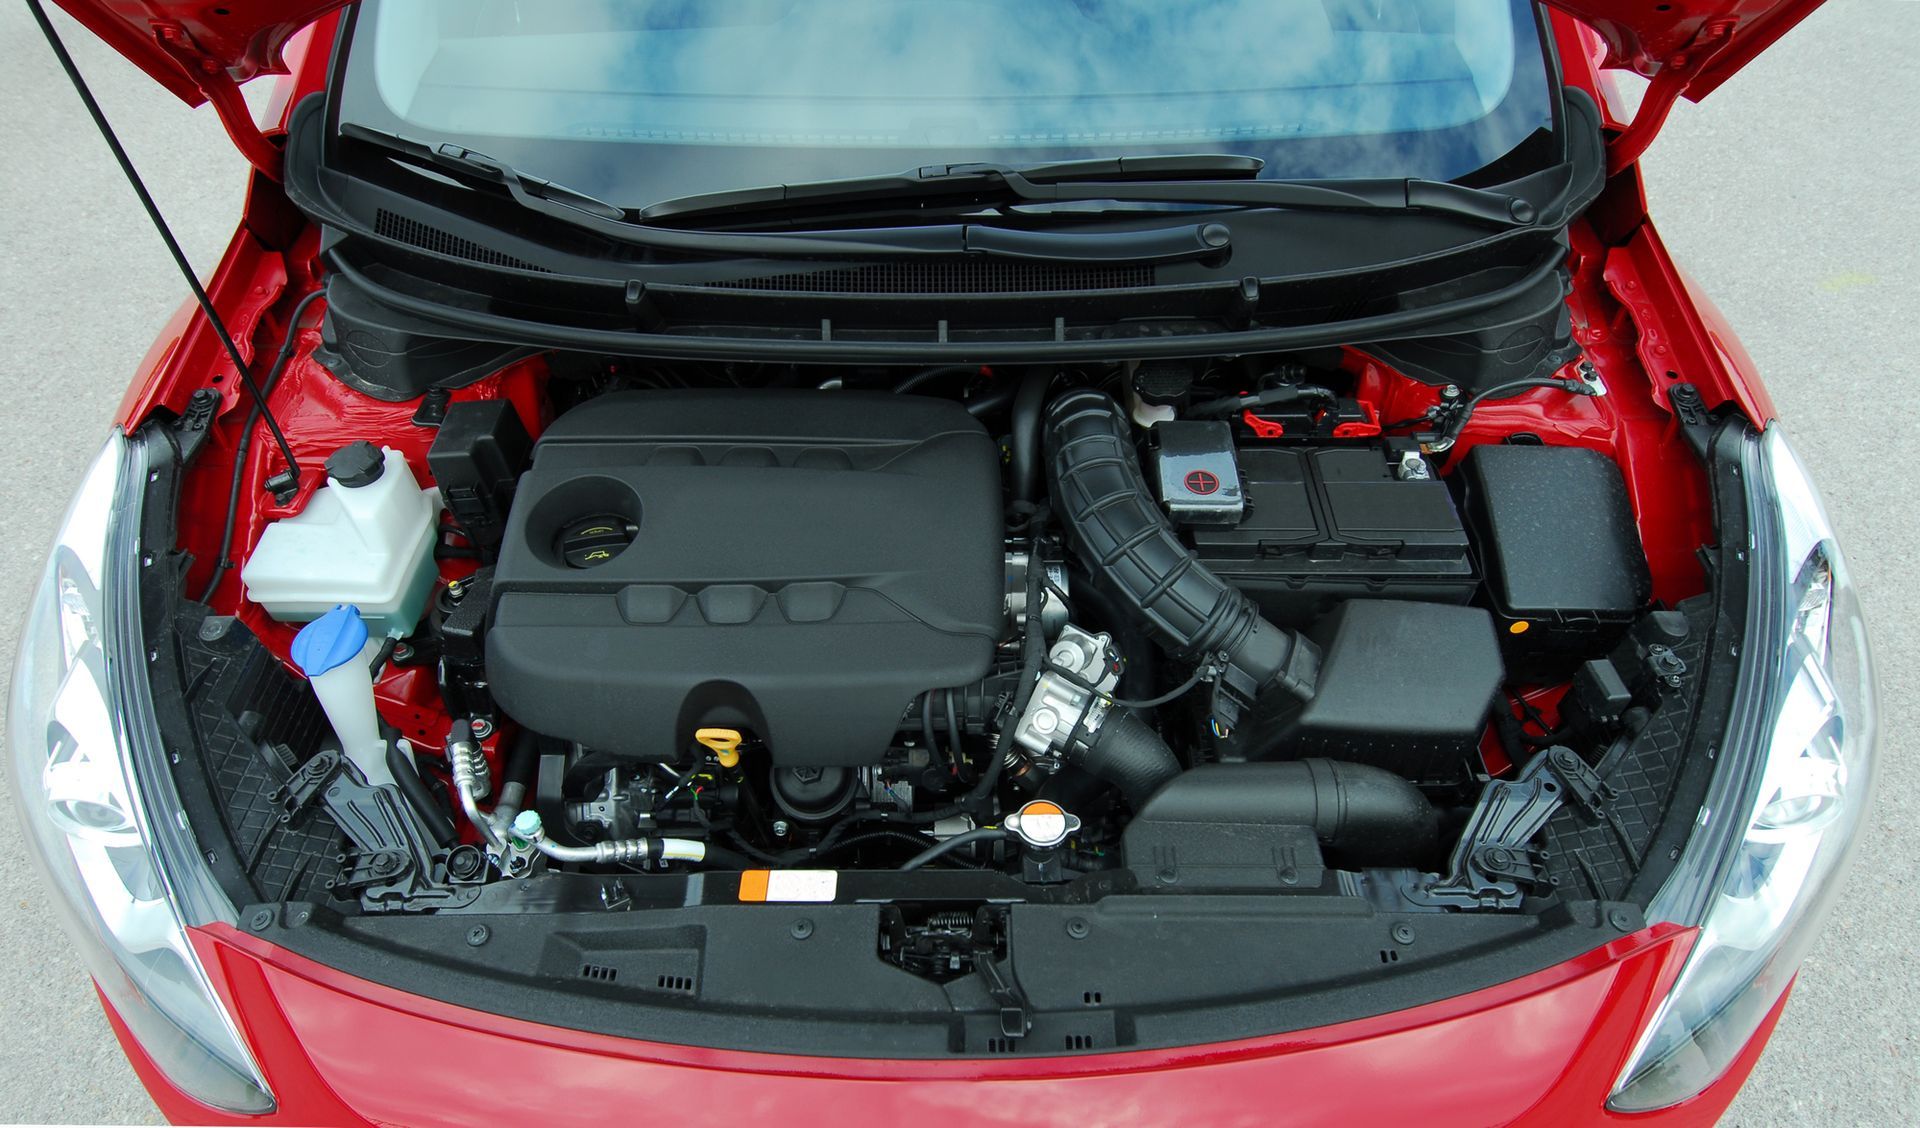 the engine of a red car with the hood open